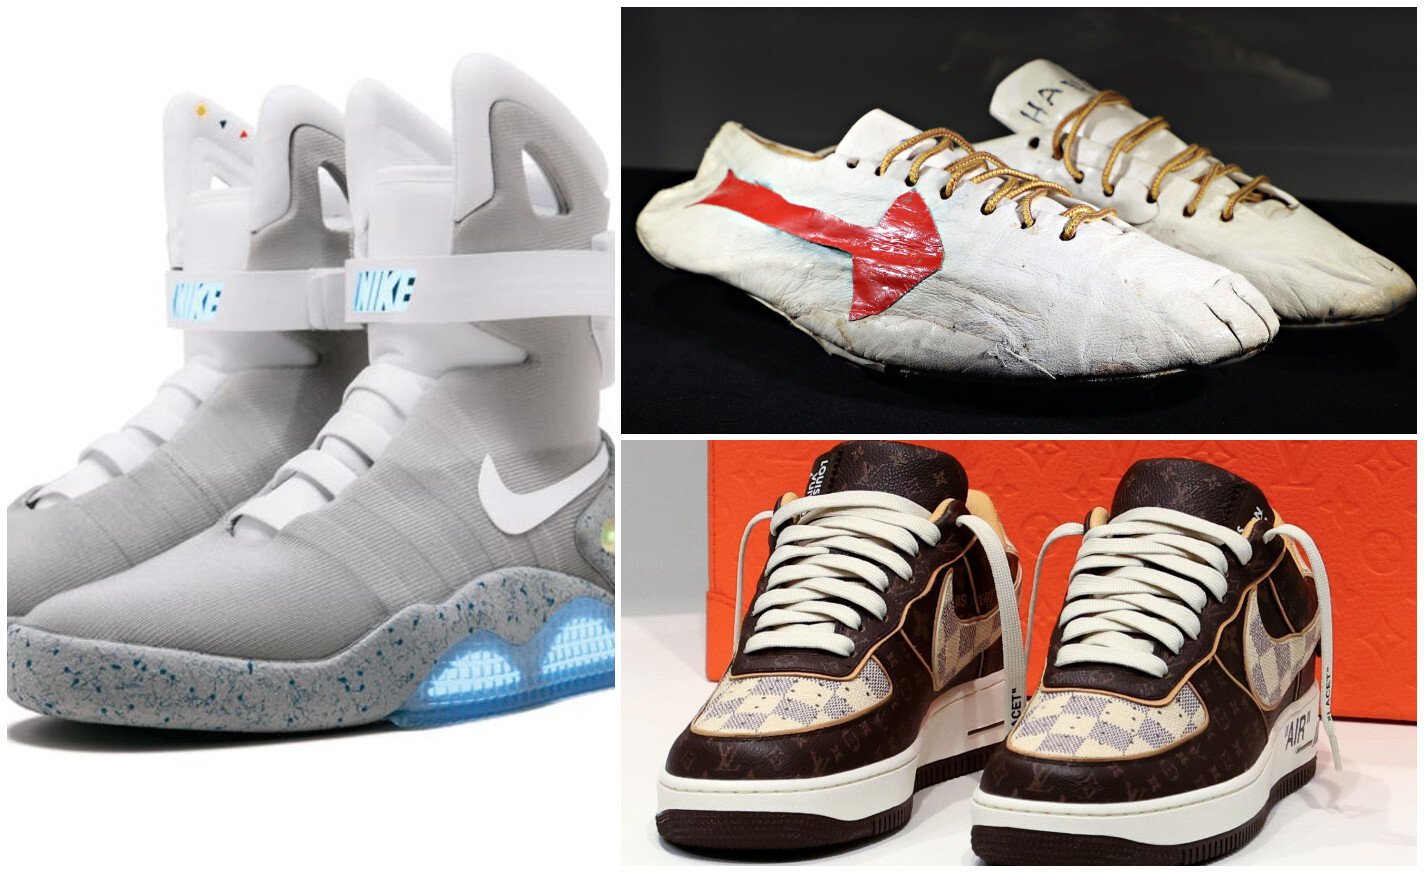 11 of the most expensive sneakers in history, from Kanye 'Ye' West's Grammy-worn Nike Air Yeezys to Michael Jordan's game-worn kicks and Virgil Abloh's Vuitton Air Force | South China